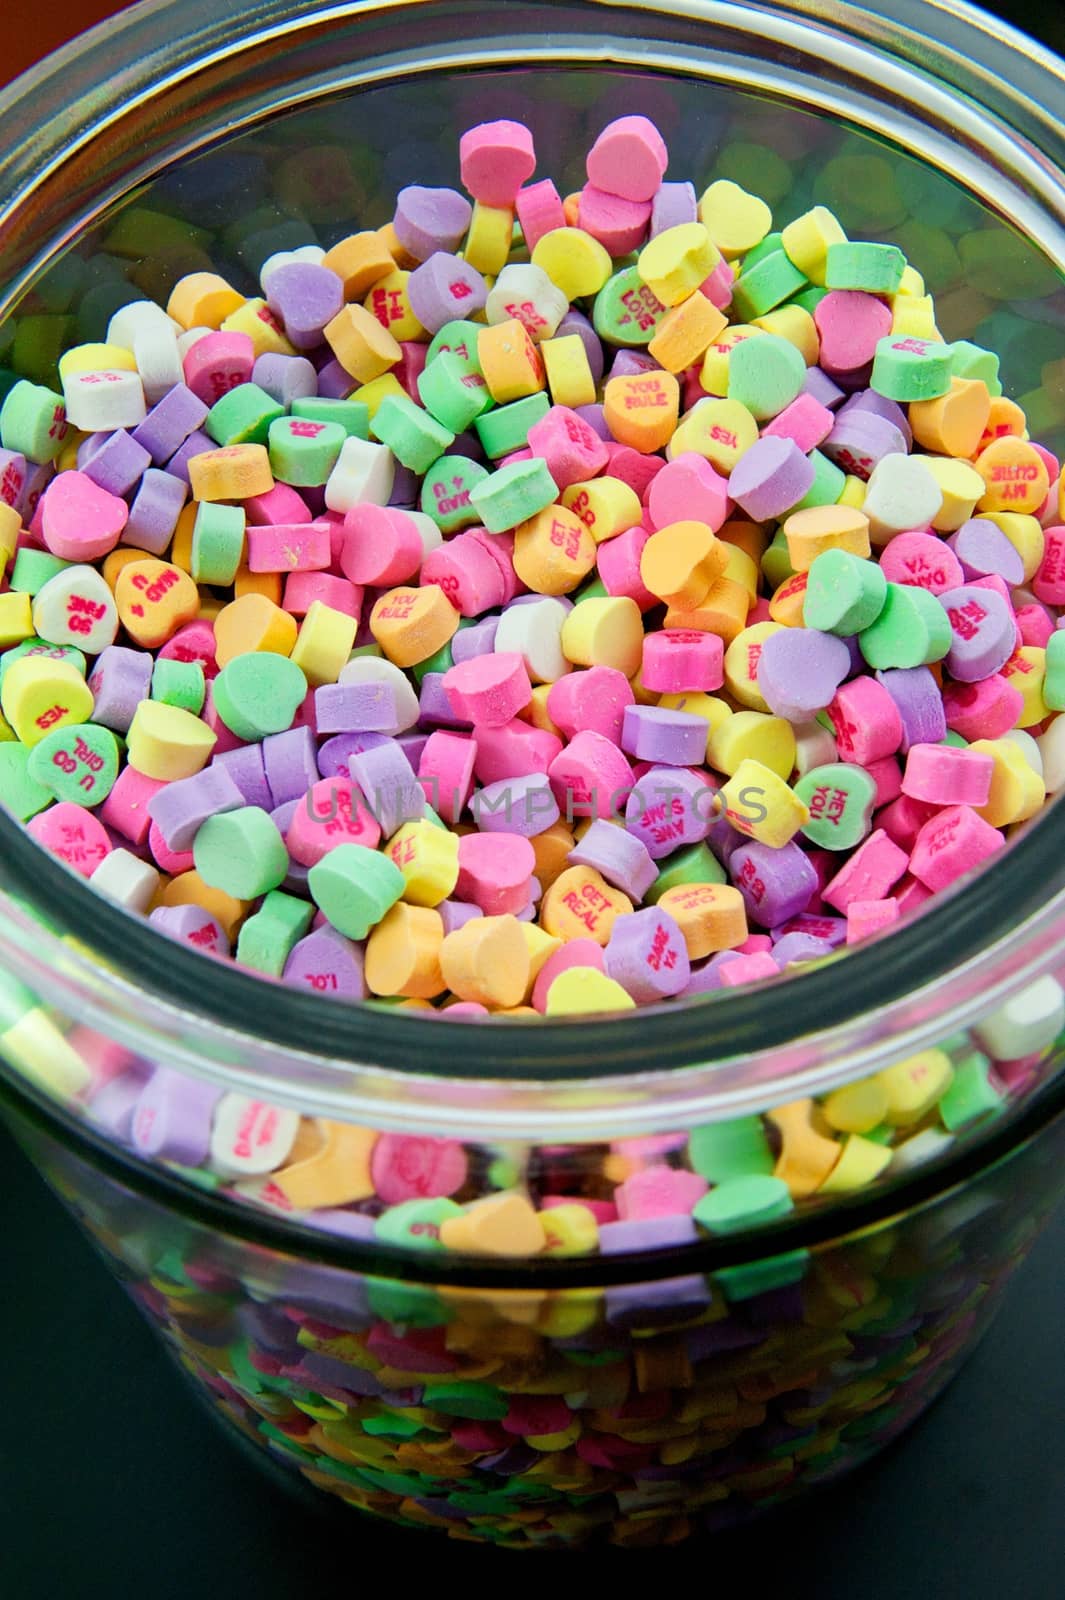 Large Glass Jar of Candy Hearts by pixelsnap